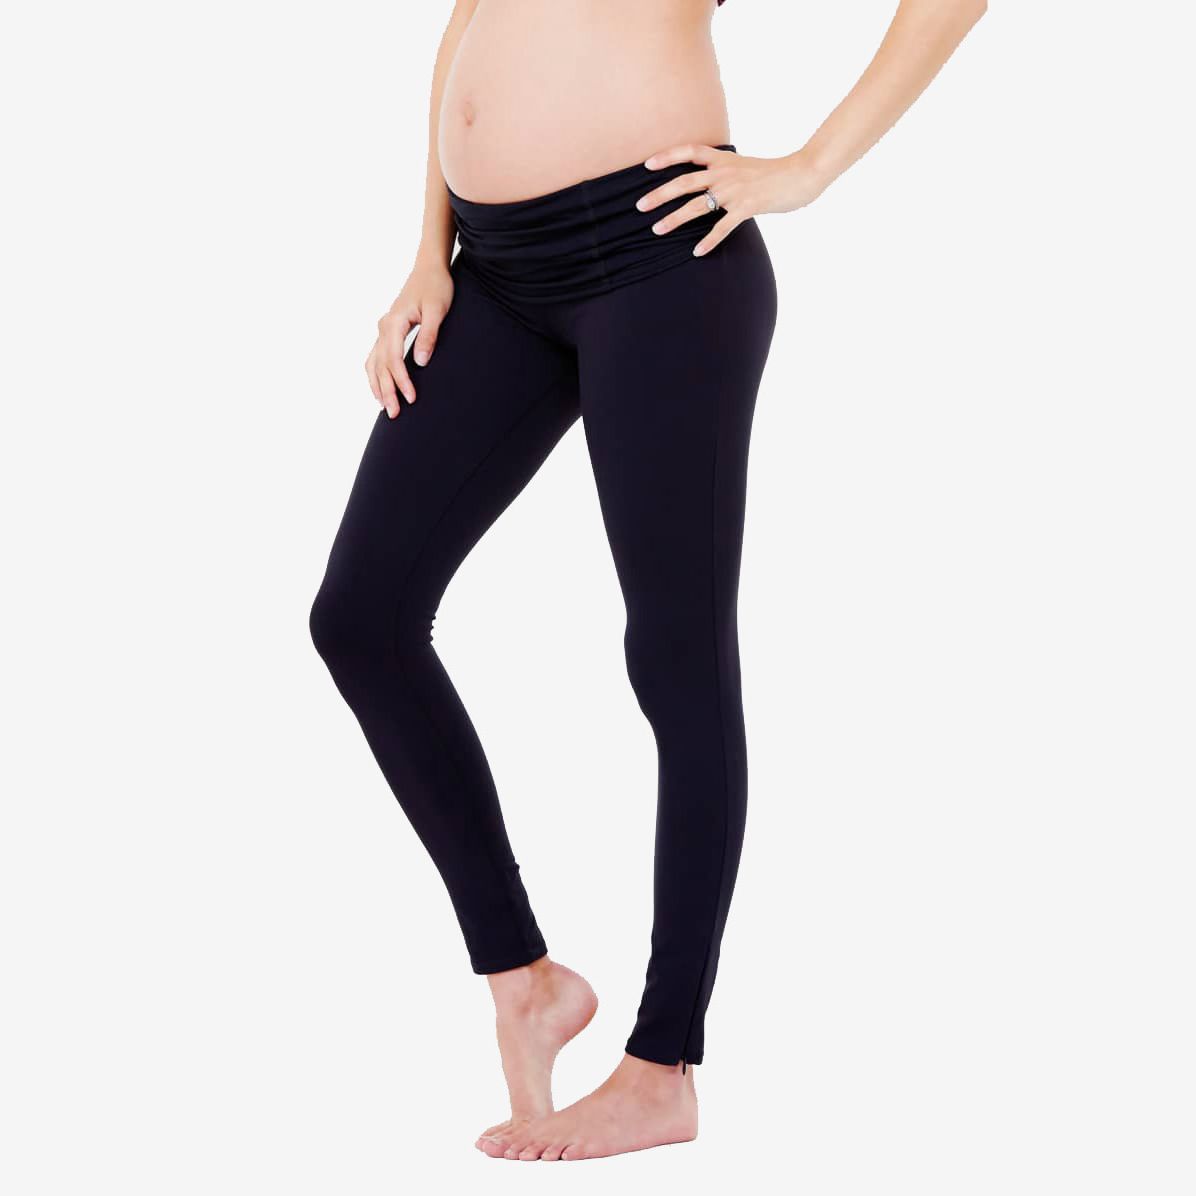 22 Best Maternity Workout Clothes 2021